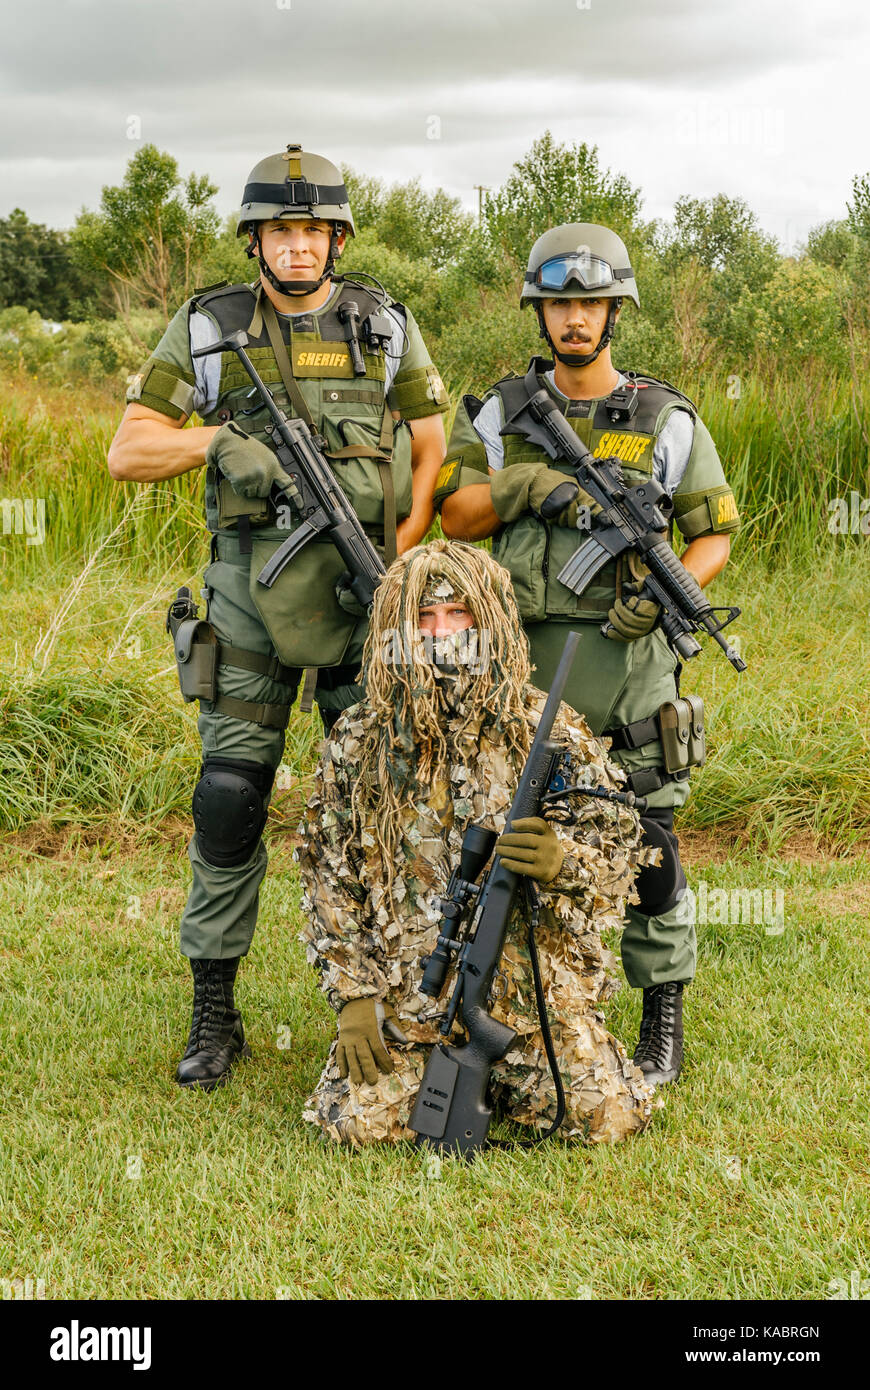 Three members of the Hillsborough County Sheriff's Office SWAT team, with full gear and one in a ghillie suit ready for a day of police training. USA. Stock Photo